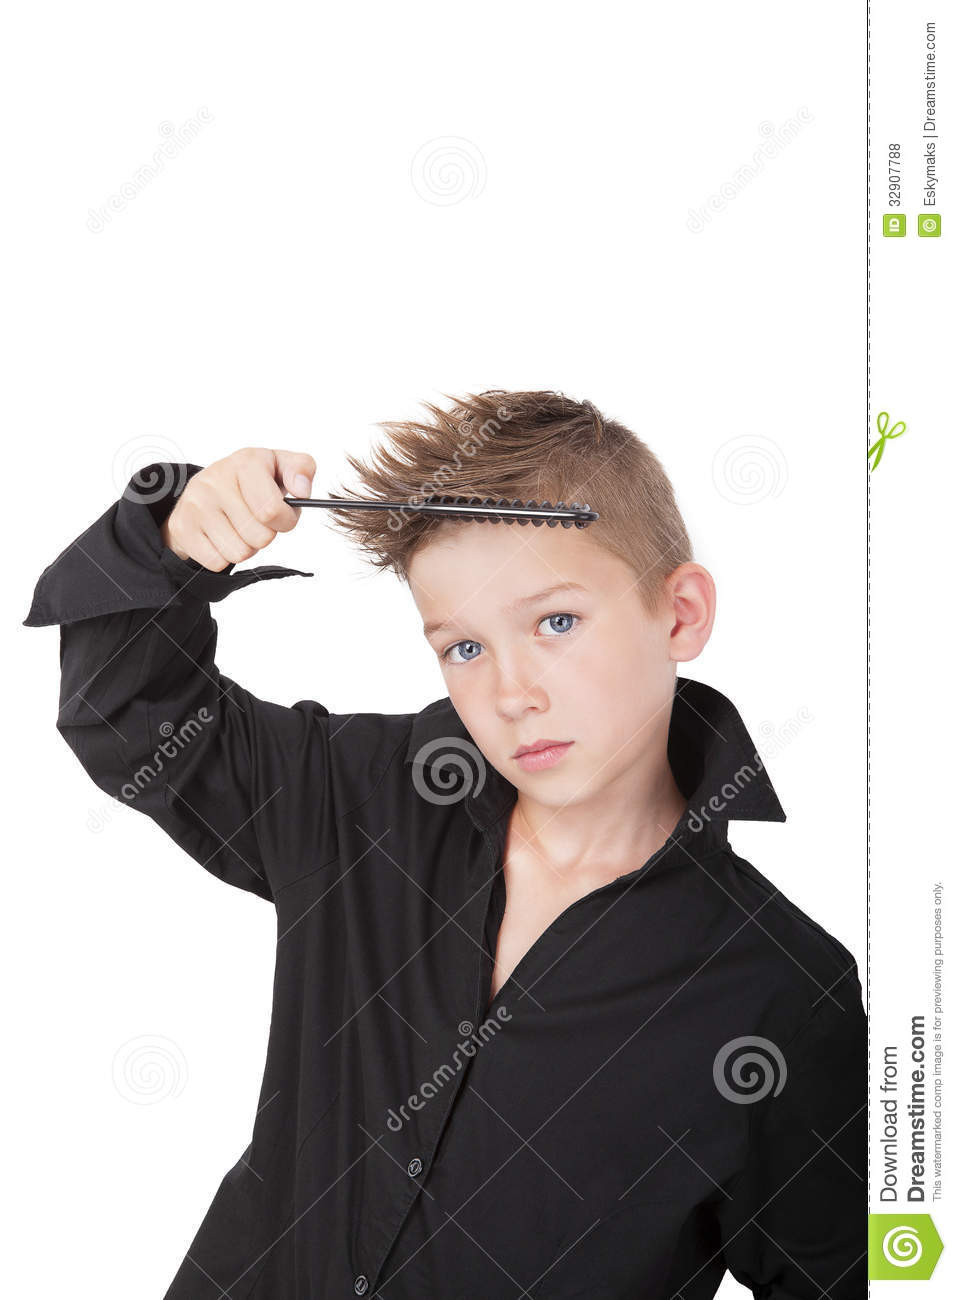 Boy Hipster Haircuts
 Boy With Cool Hipster Haircut Stock Image of